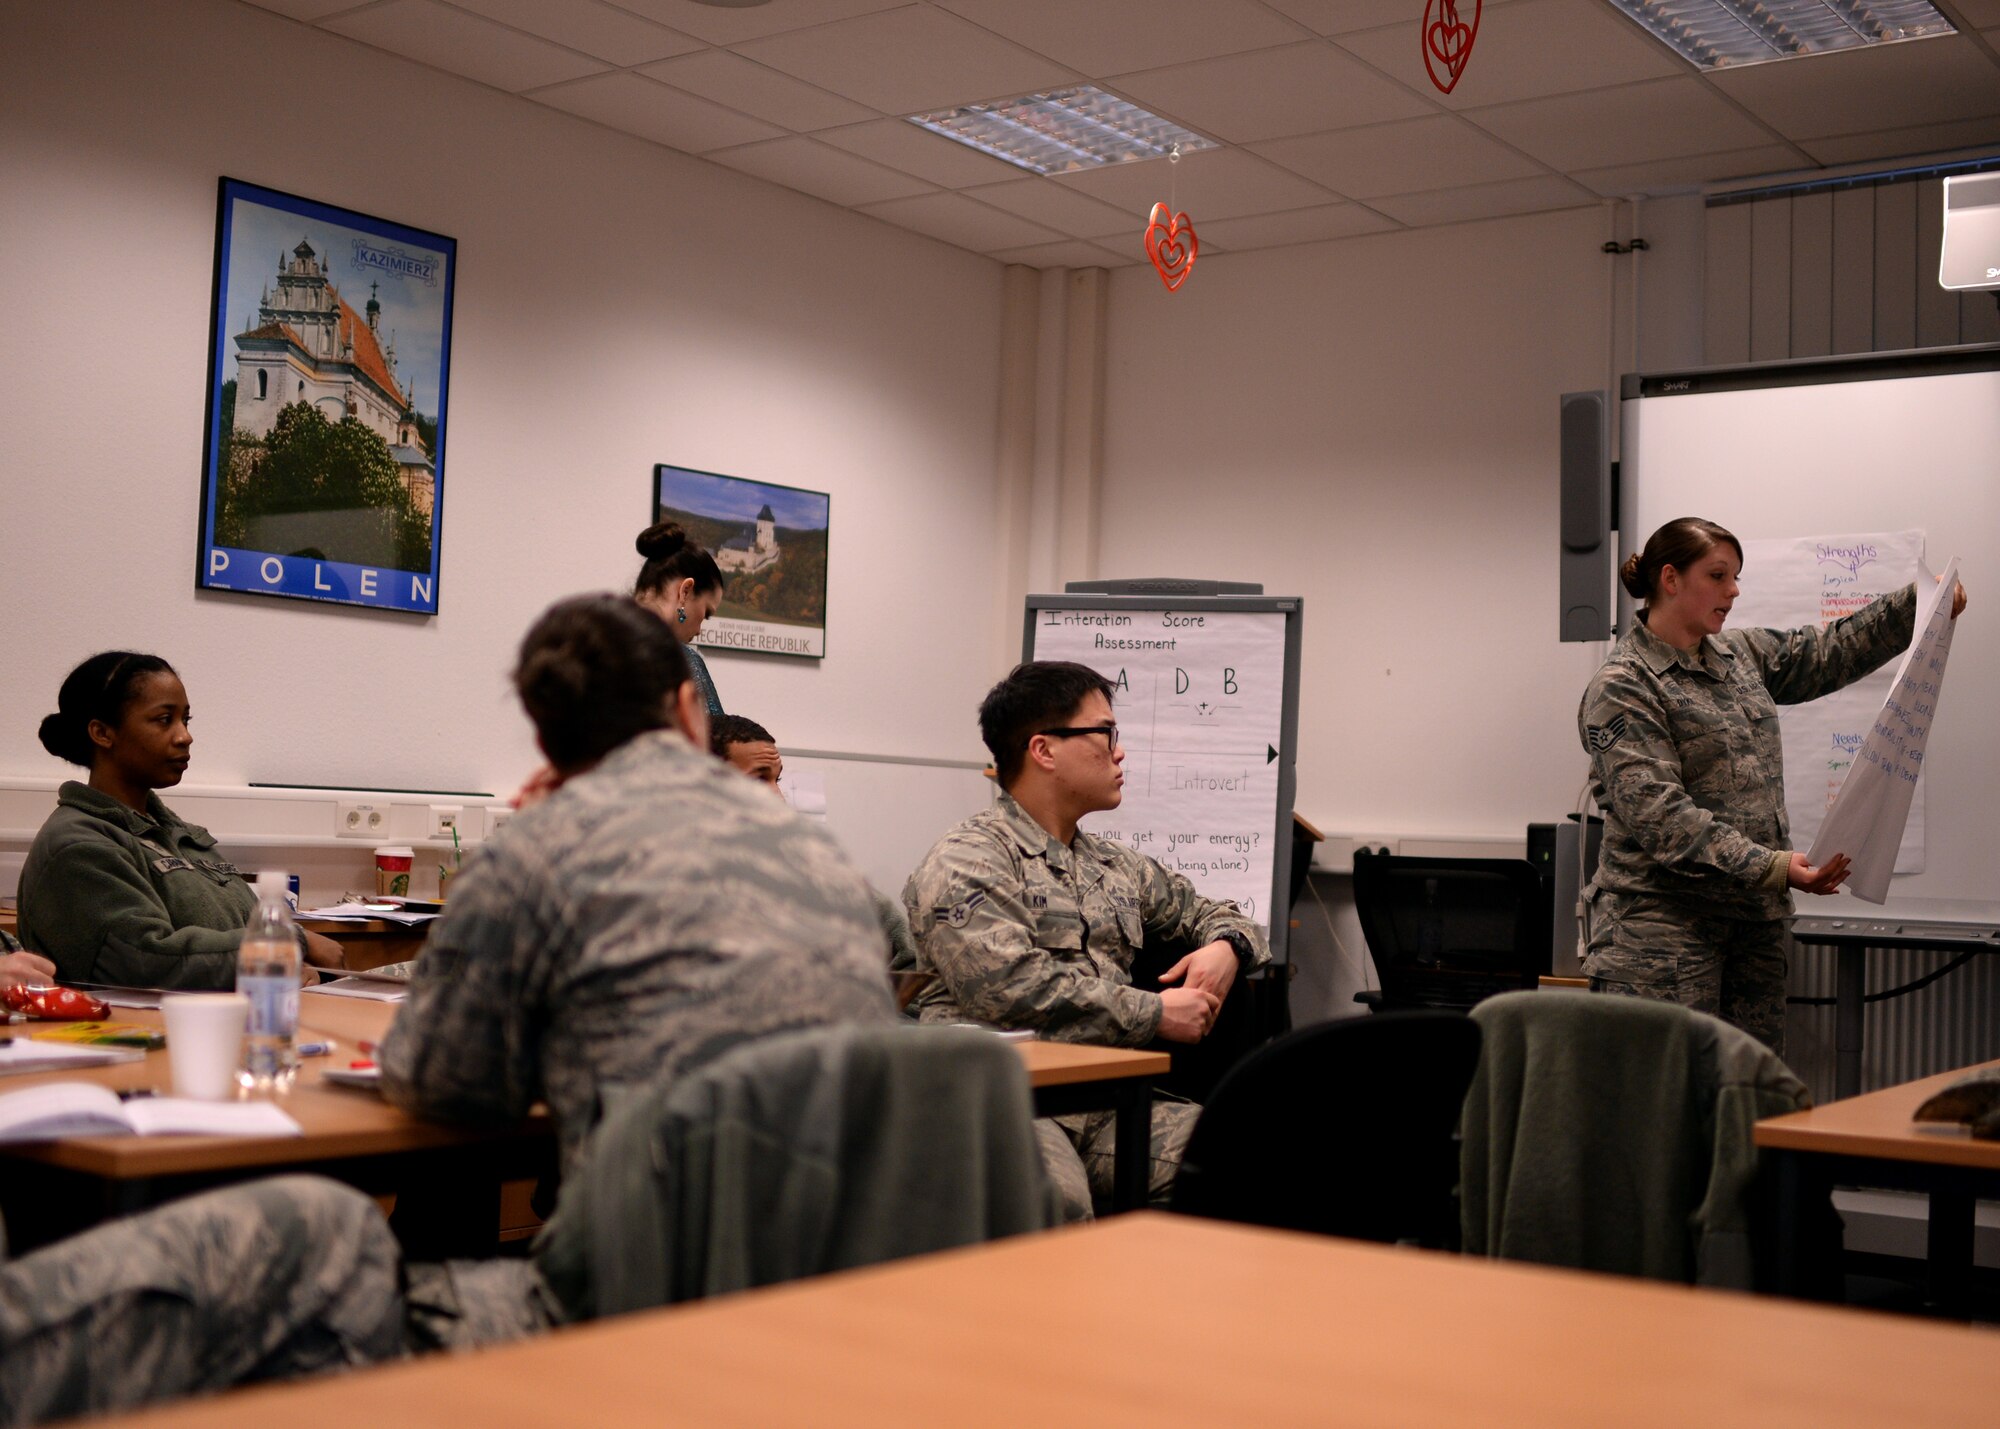 An Airman delivers a presentation during the Four Lenses assessment Jan. 14, 2015, in the 52nd Force Support Squadron's Airman and Family Readiness Center at Spangdahlem Air Base, Germany. The instructors separated the class into groups who then created a list of values, strengths, needs and joys of their personality types. (U.S. Air Force photo by Staff Sgt. Daryl Knee/Released)